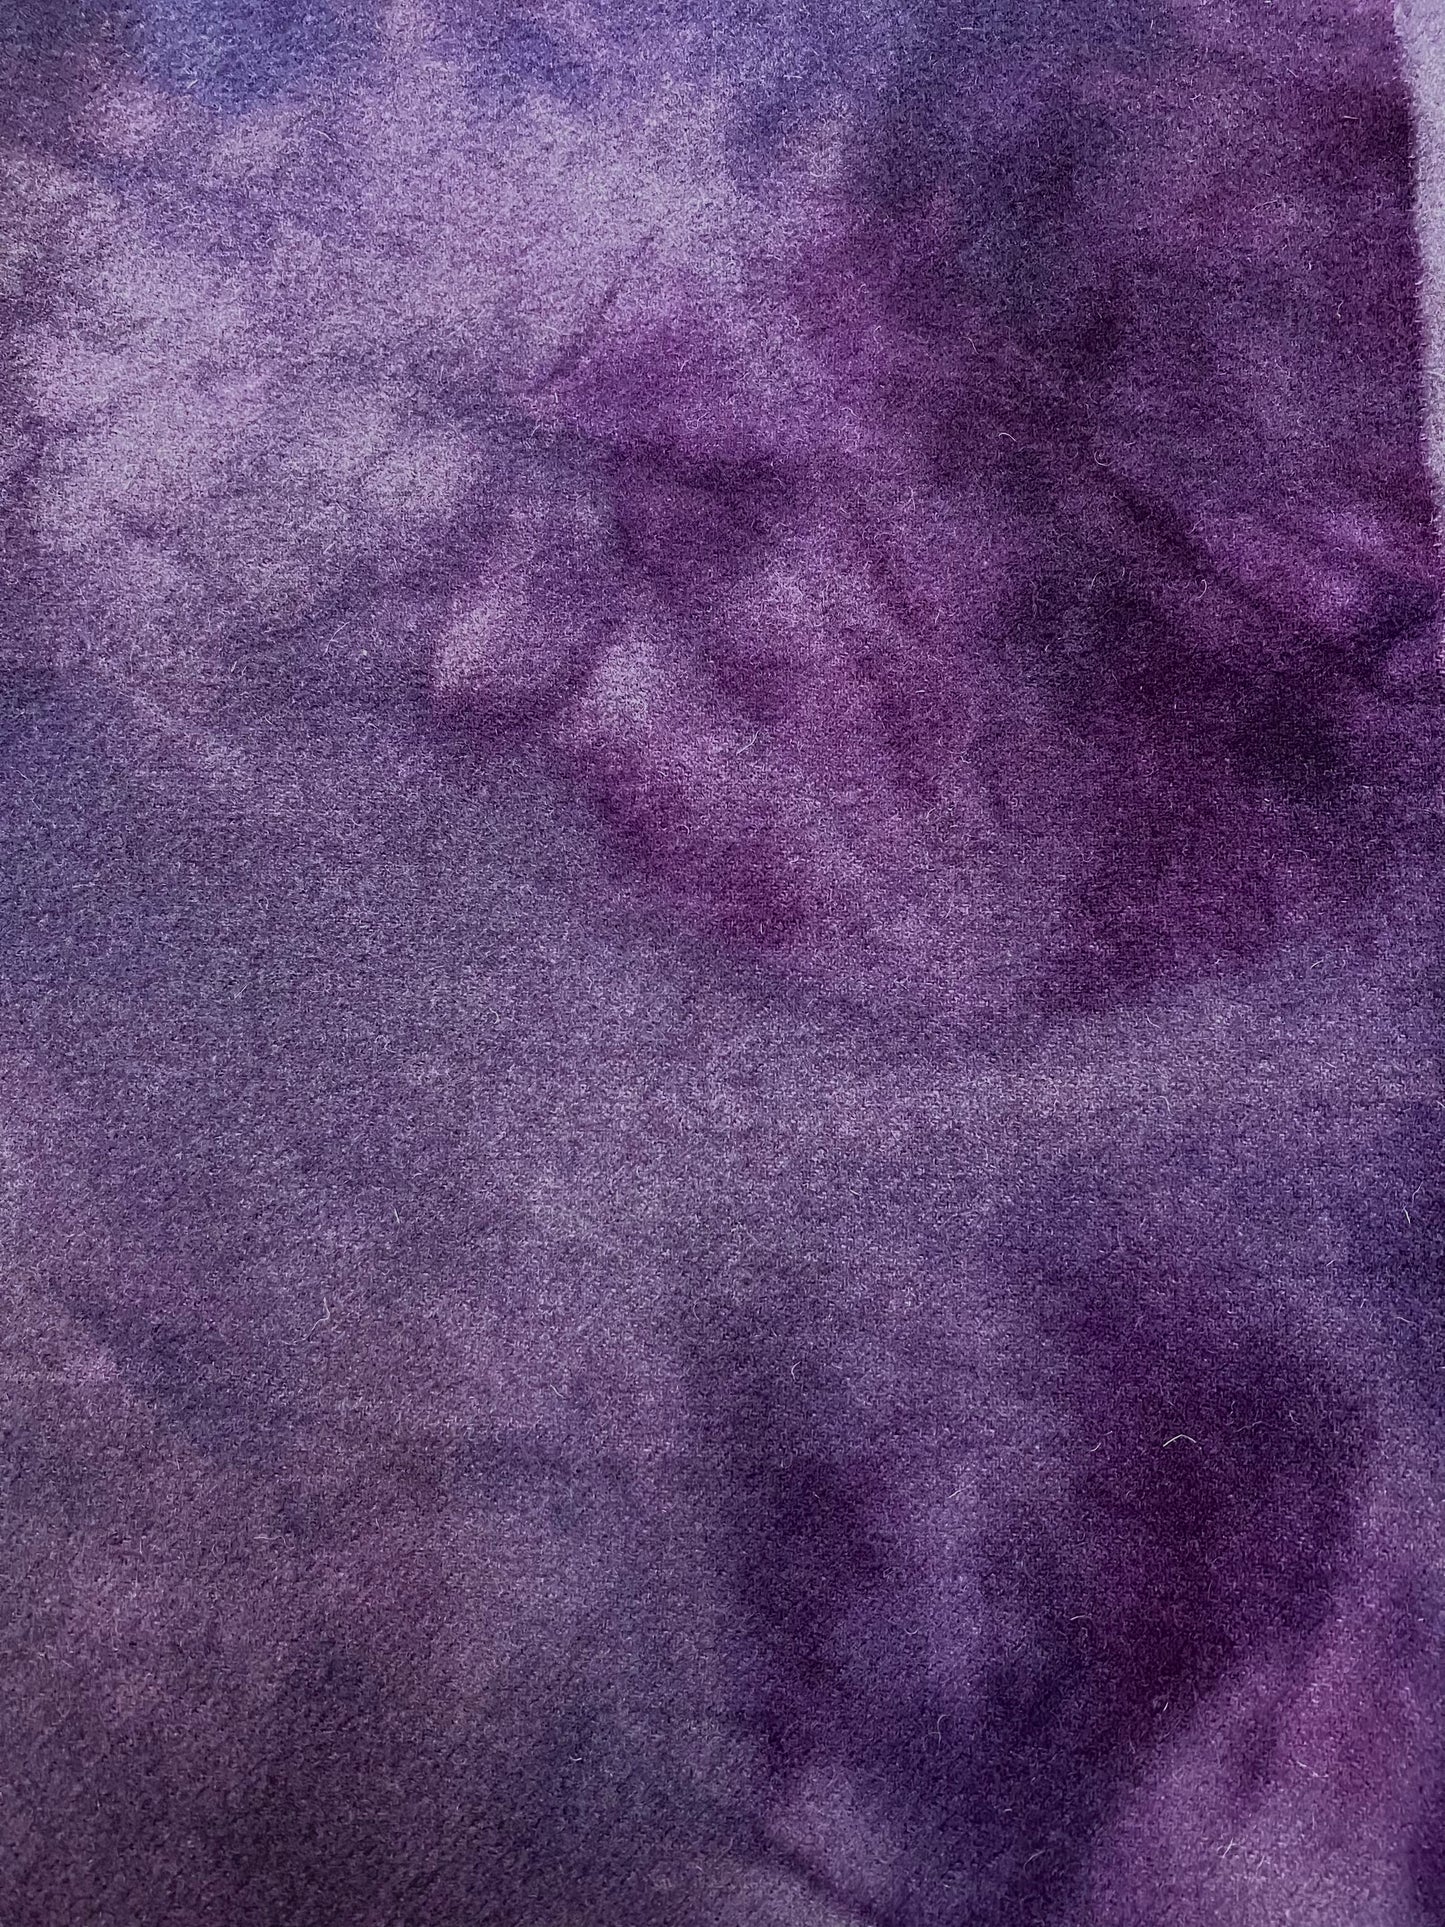 Hand Dyed Wool, 1/2 Yard, WILD PURPLE ORCHID